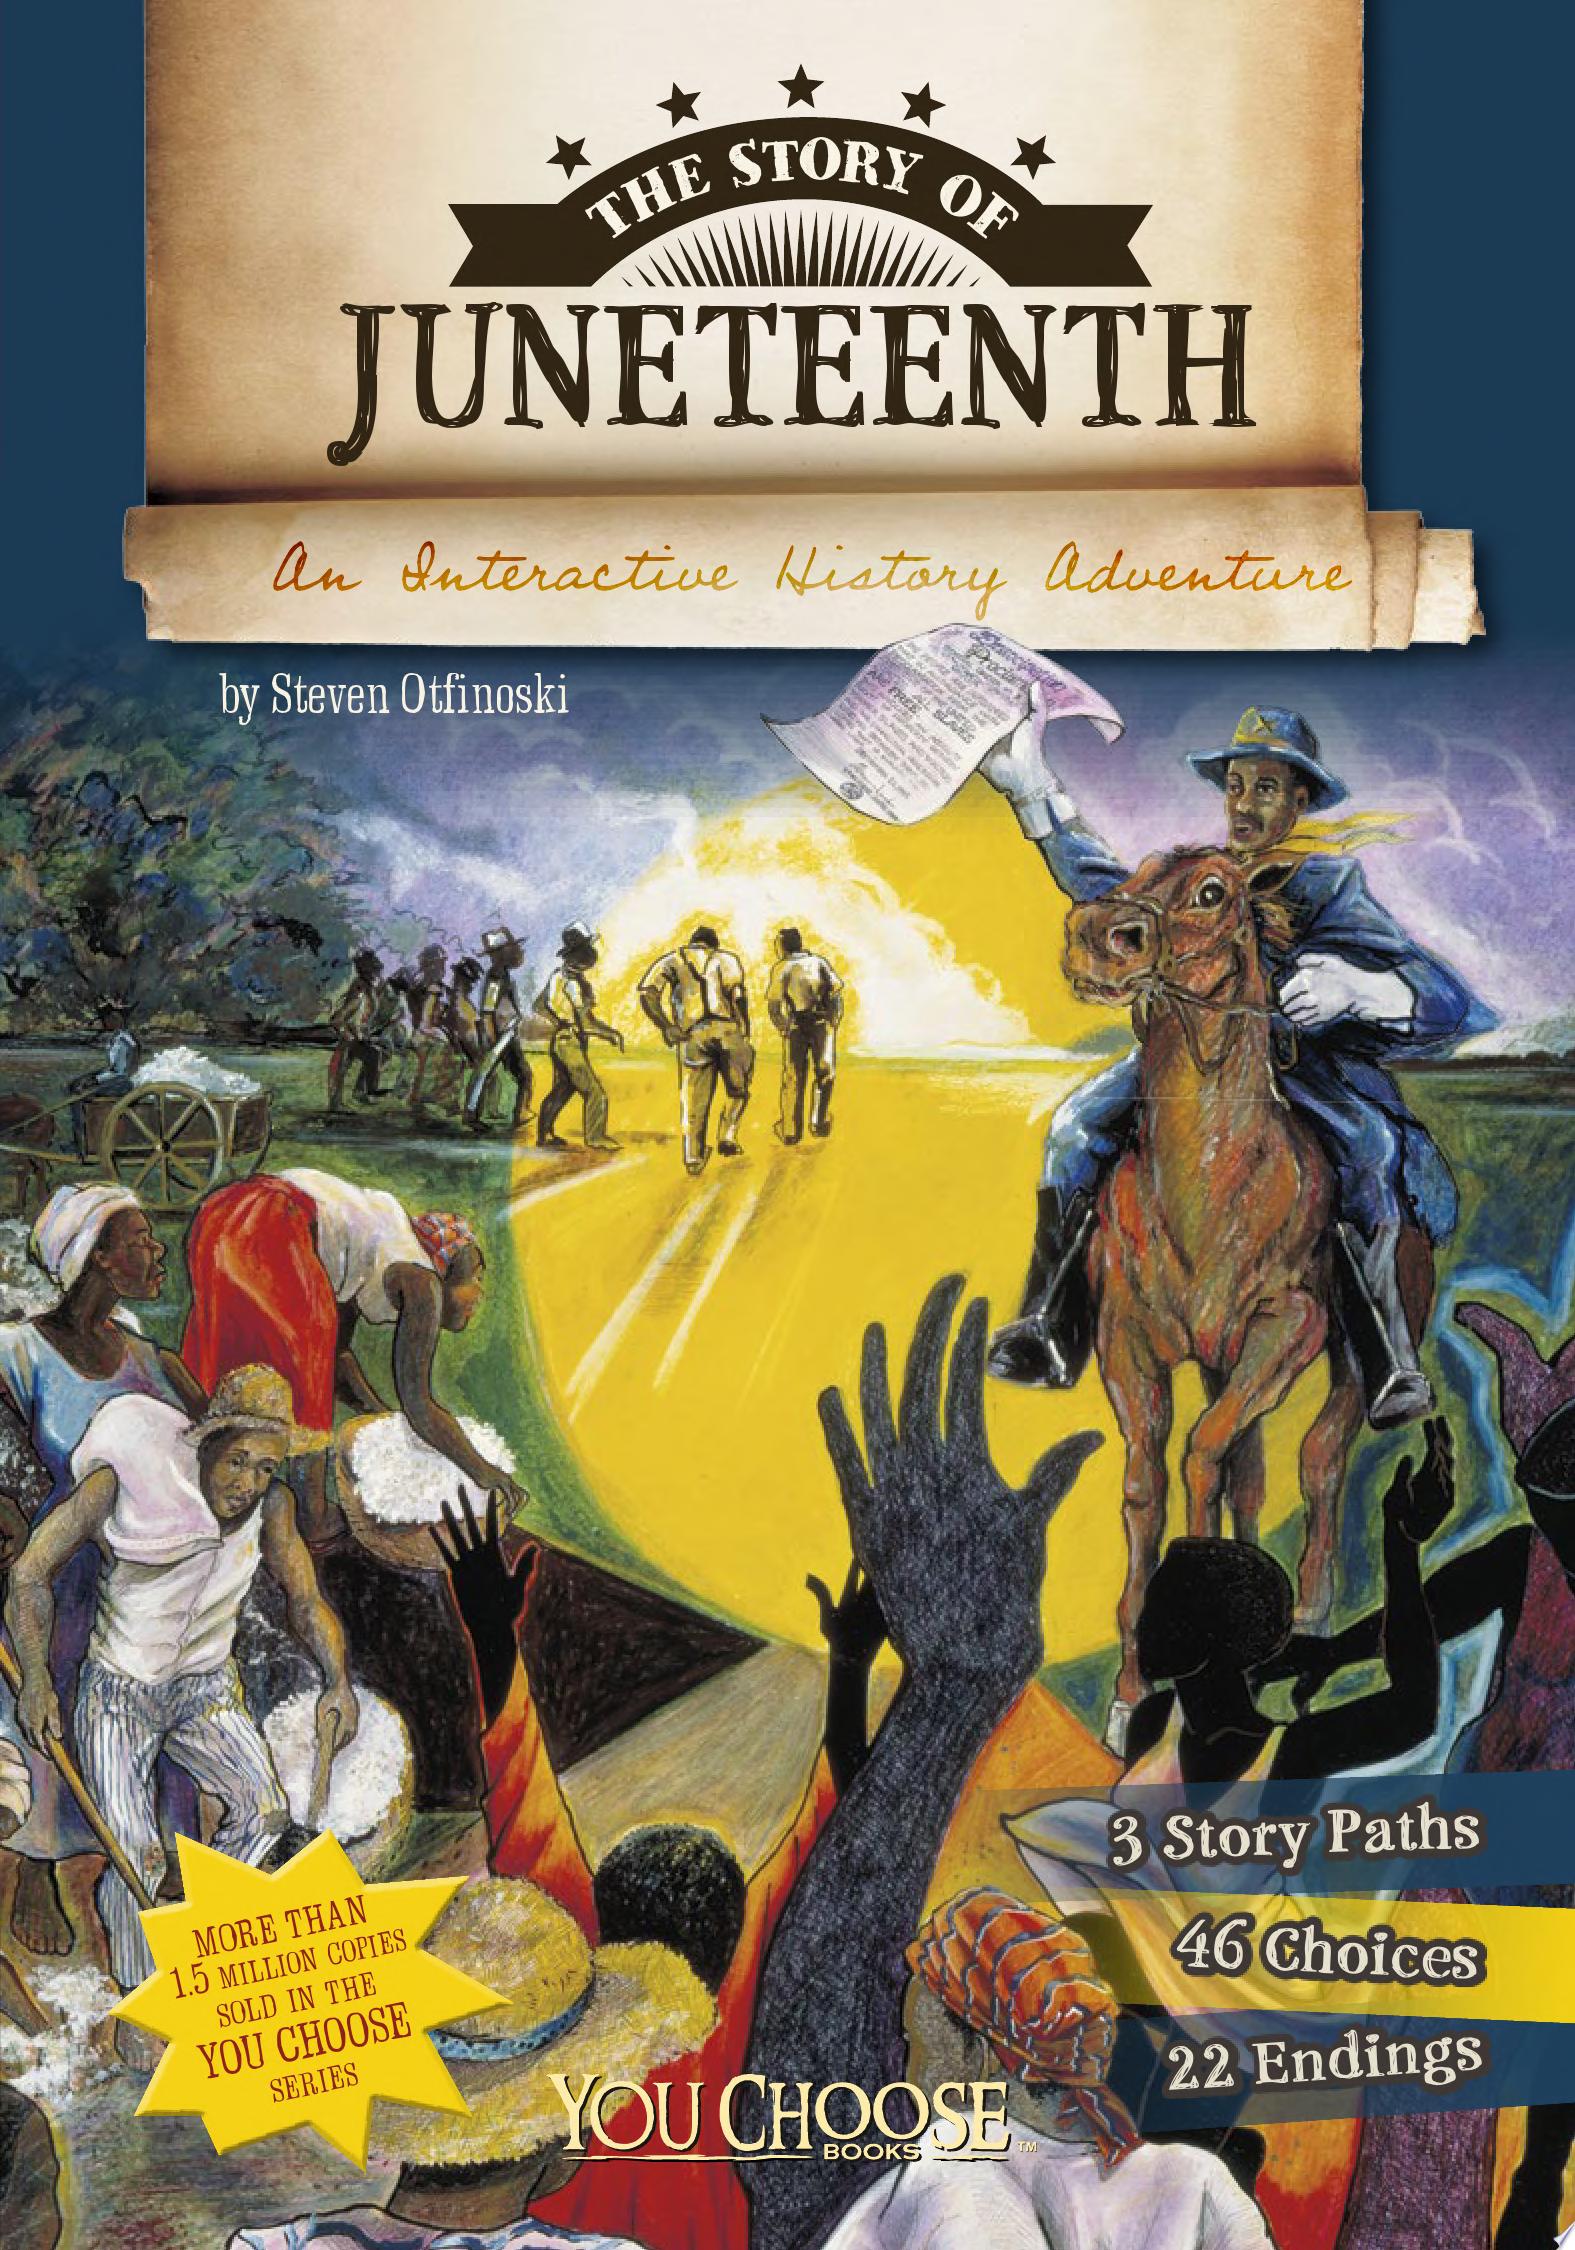 Image for "The Story of Juneteenth: an interactive history adventure"